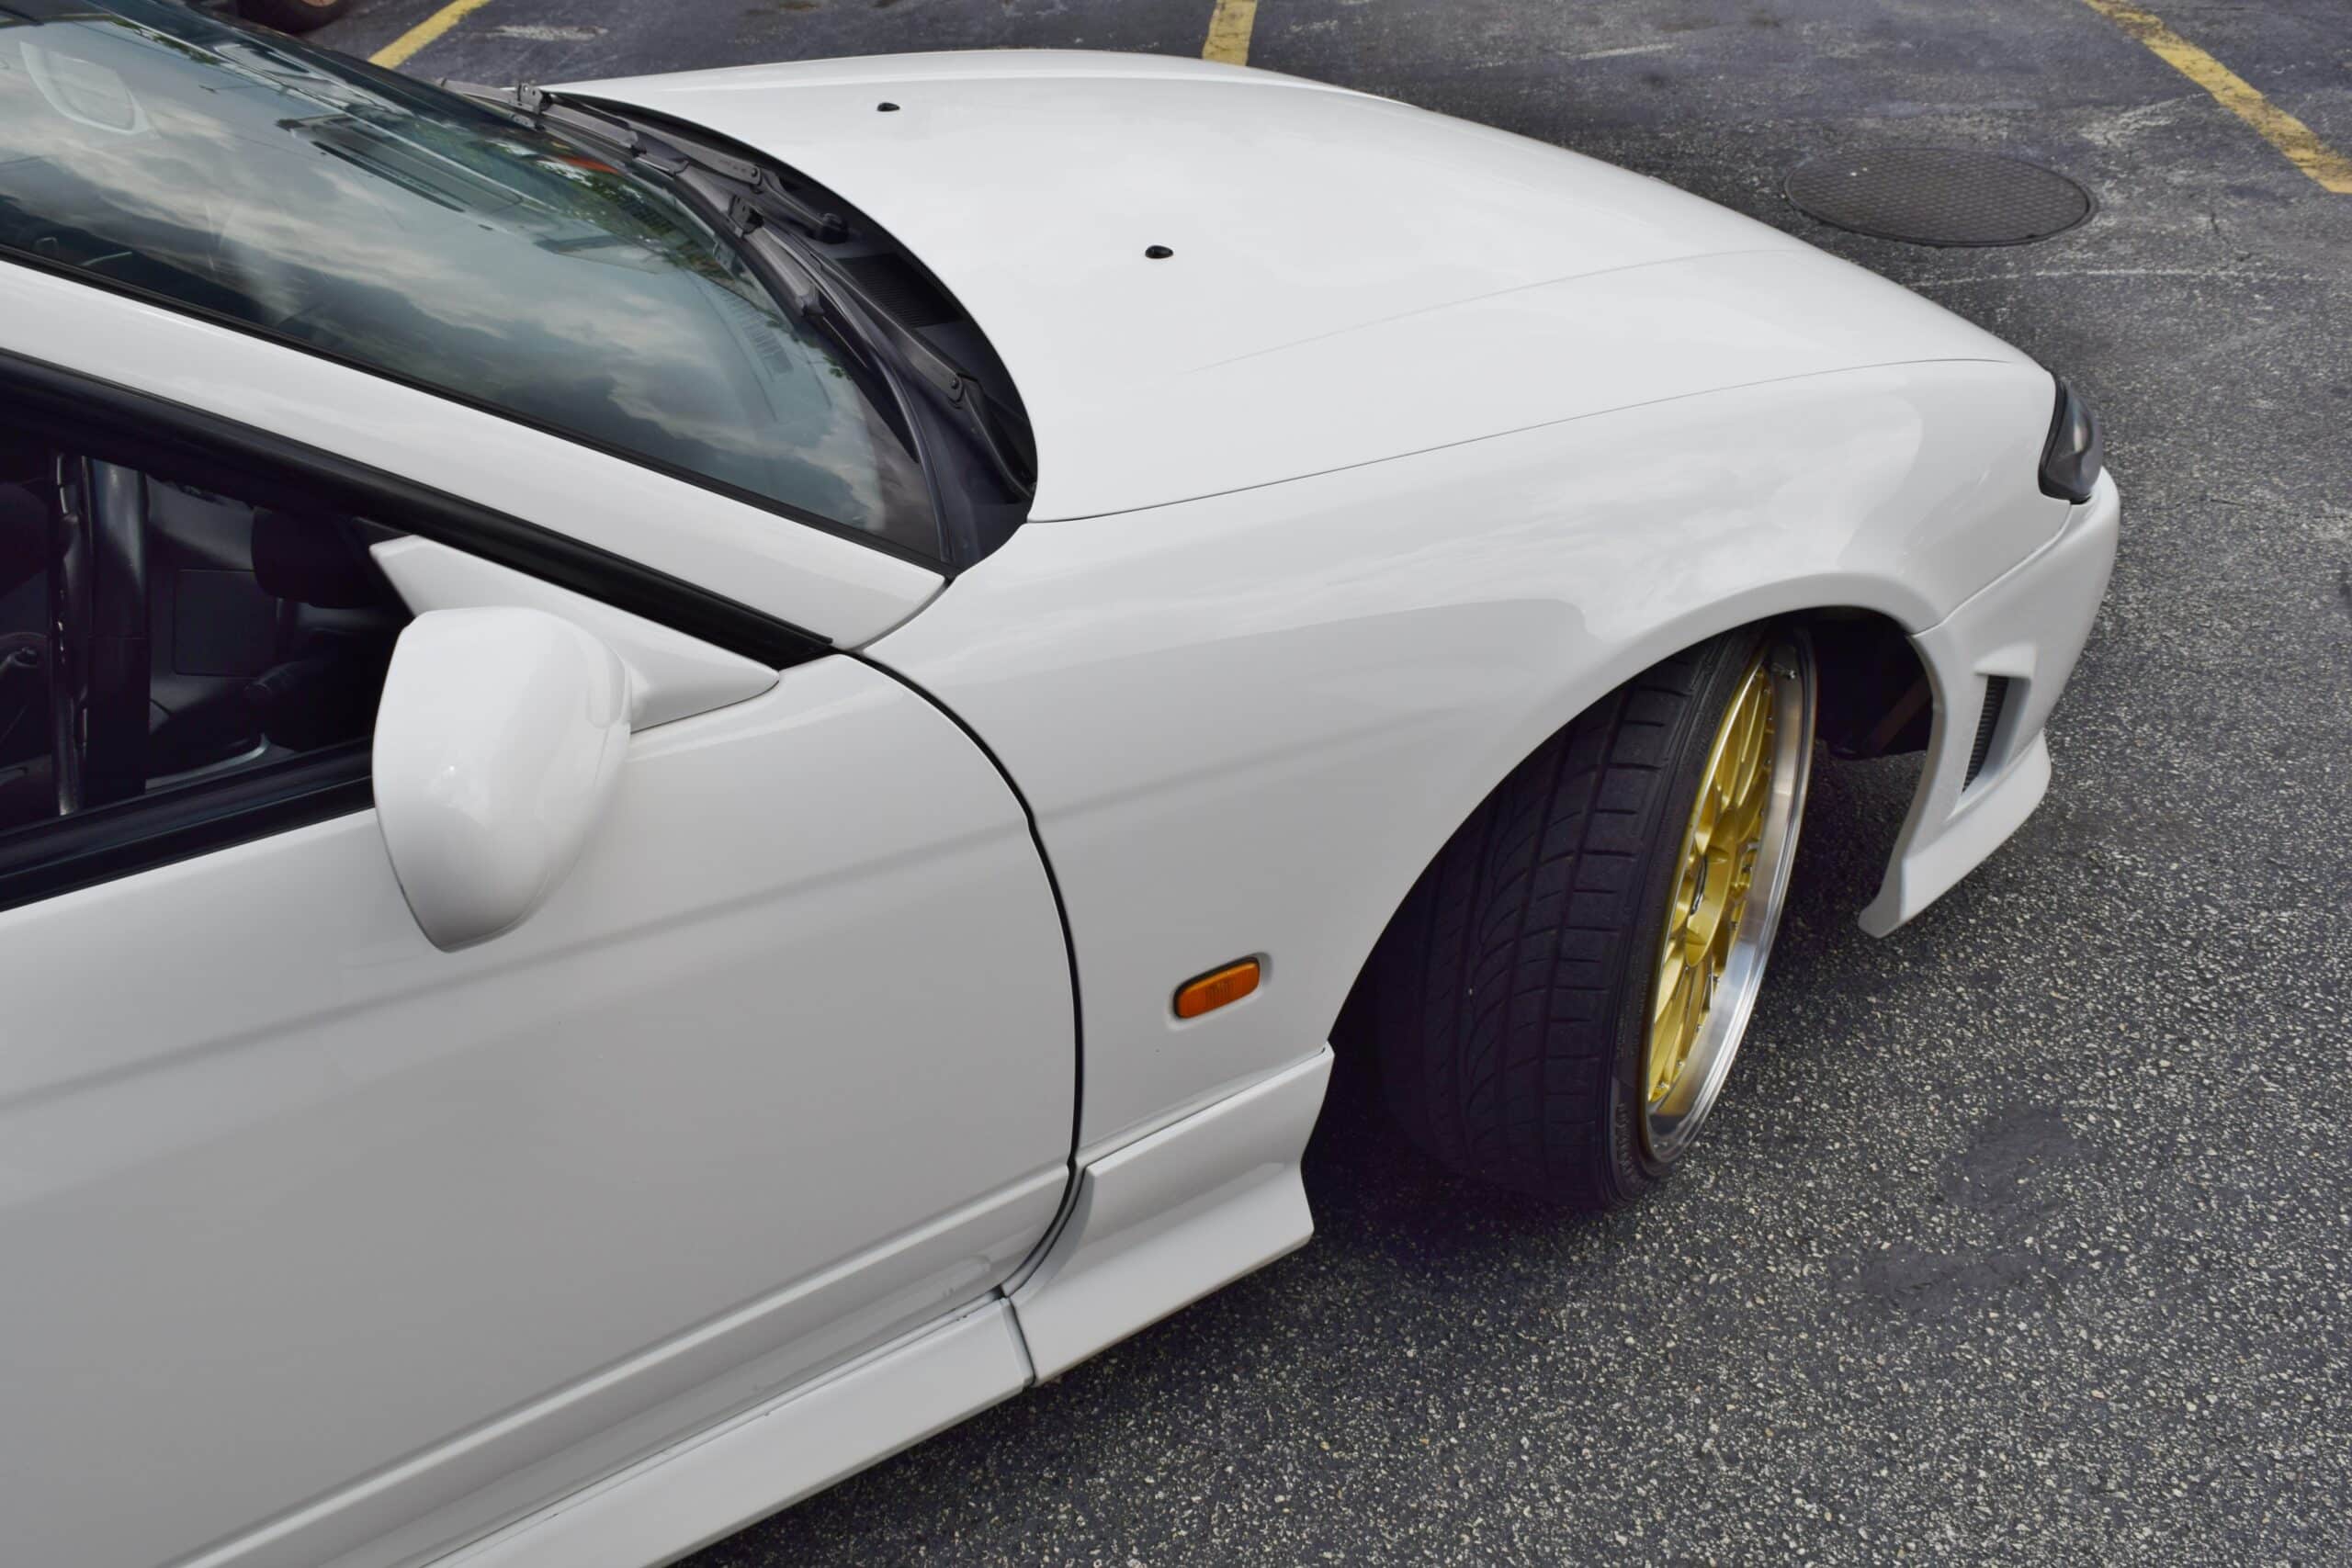 1999 Nissan 240SX Silvia S15 Spec R SR20 Turbo 375HP Well Sorted 6 speed manual with New Tein Coilovers/ New Clutch